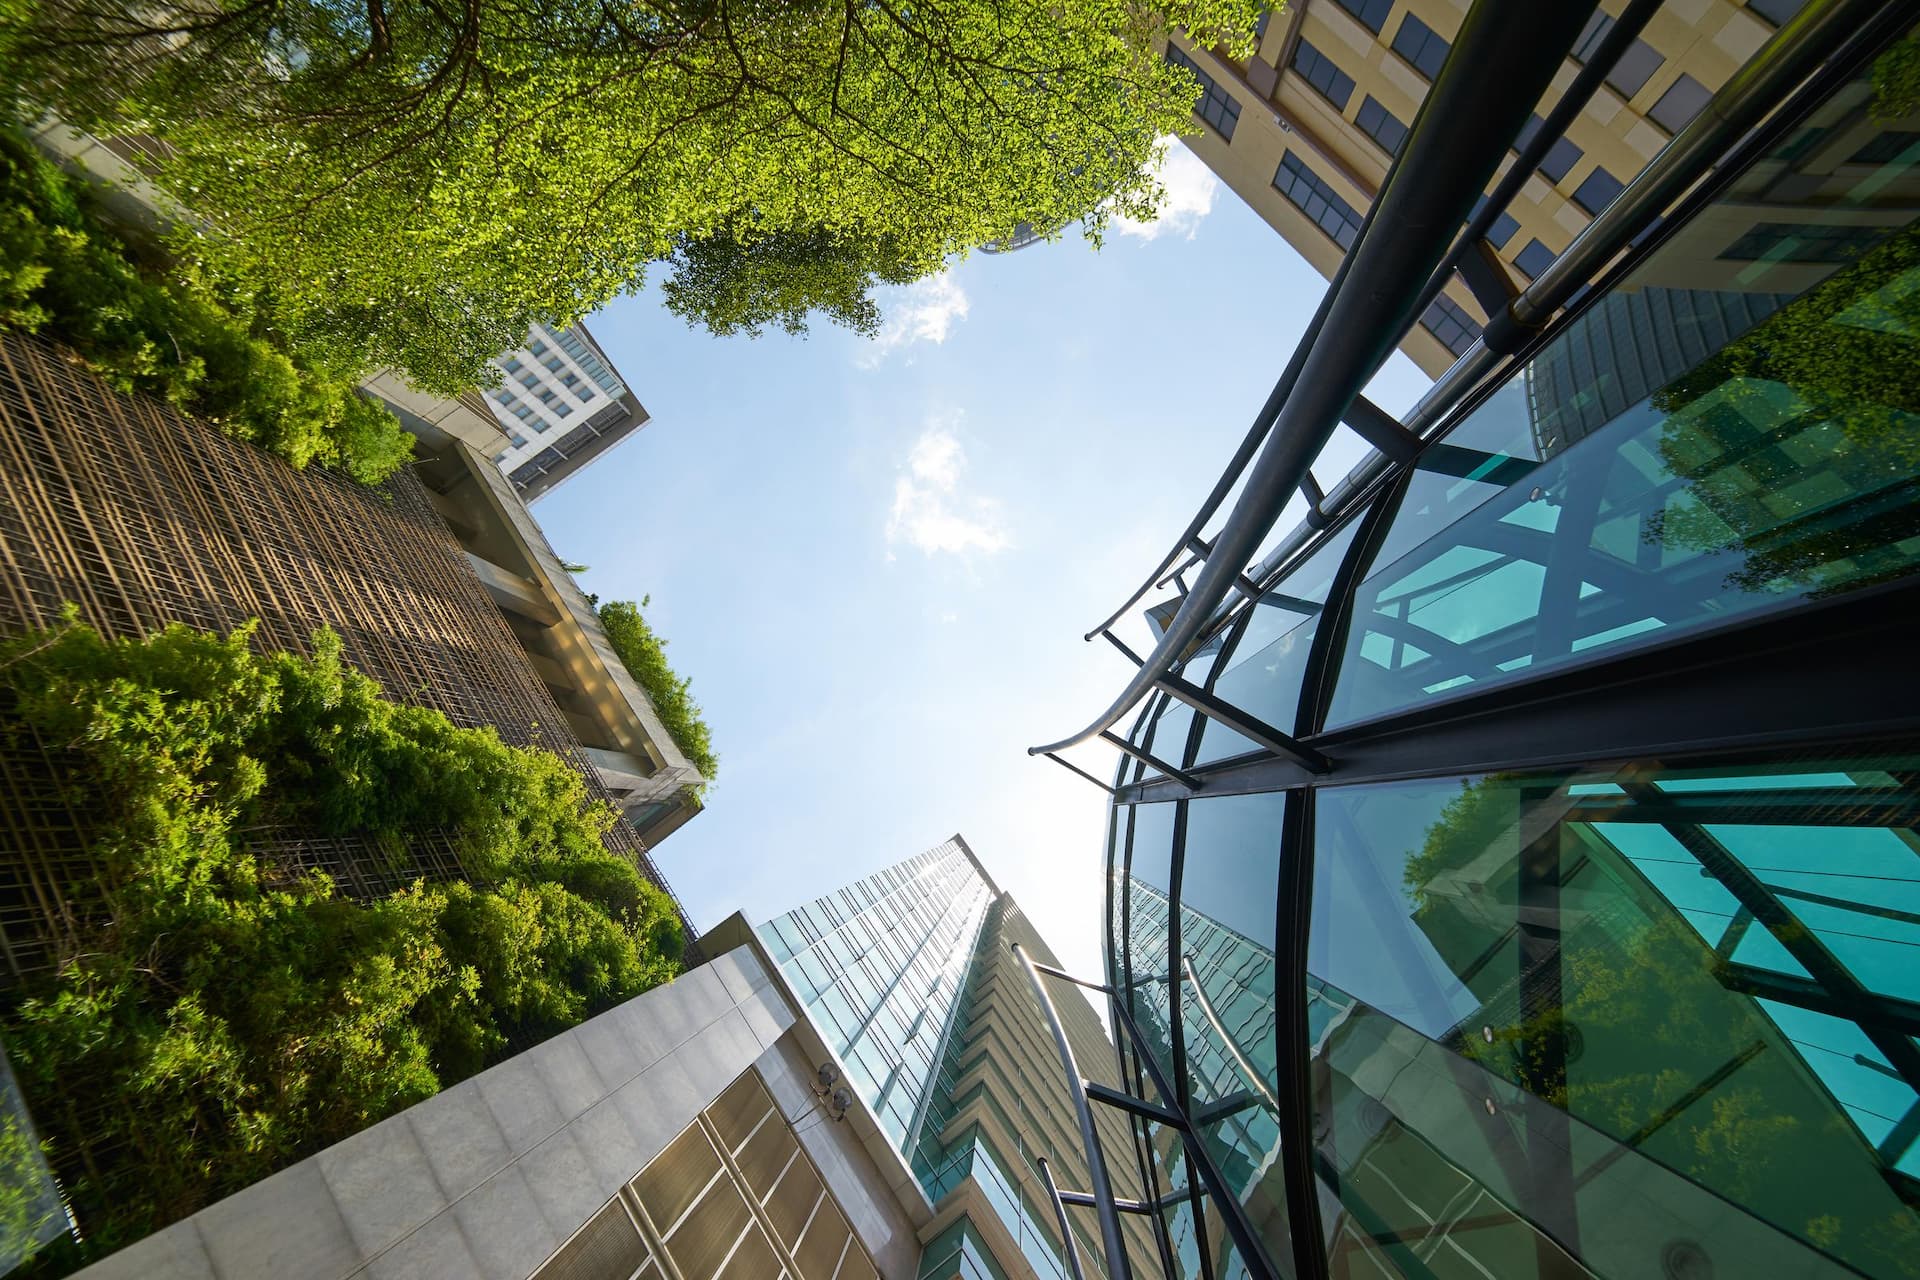 Low angle shot of modern glass buildings and green with clear sky background.; Shutterstock ID 613341923; purchase_order: Martin Christiansen